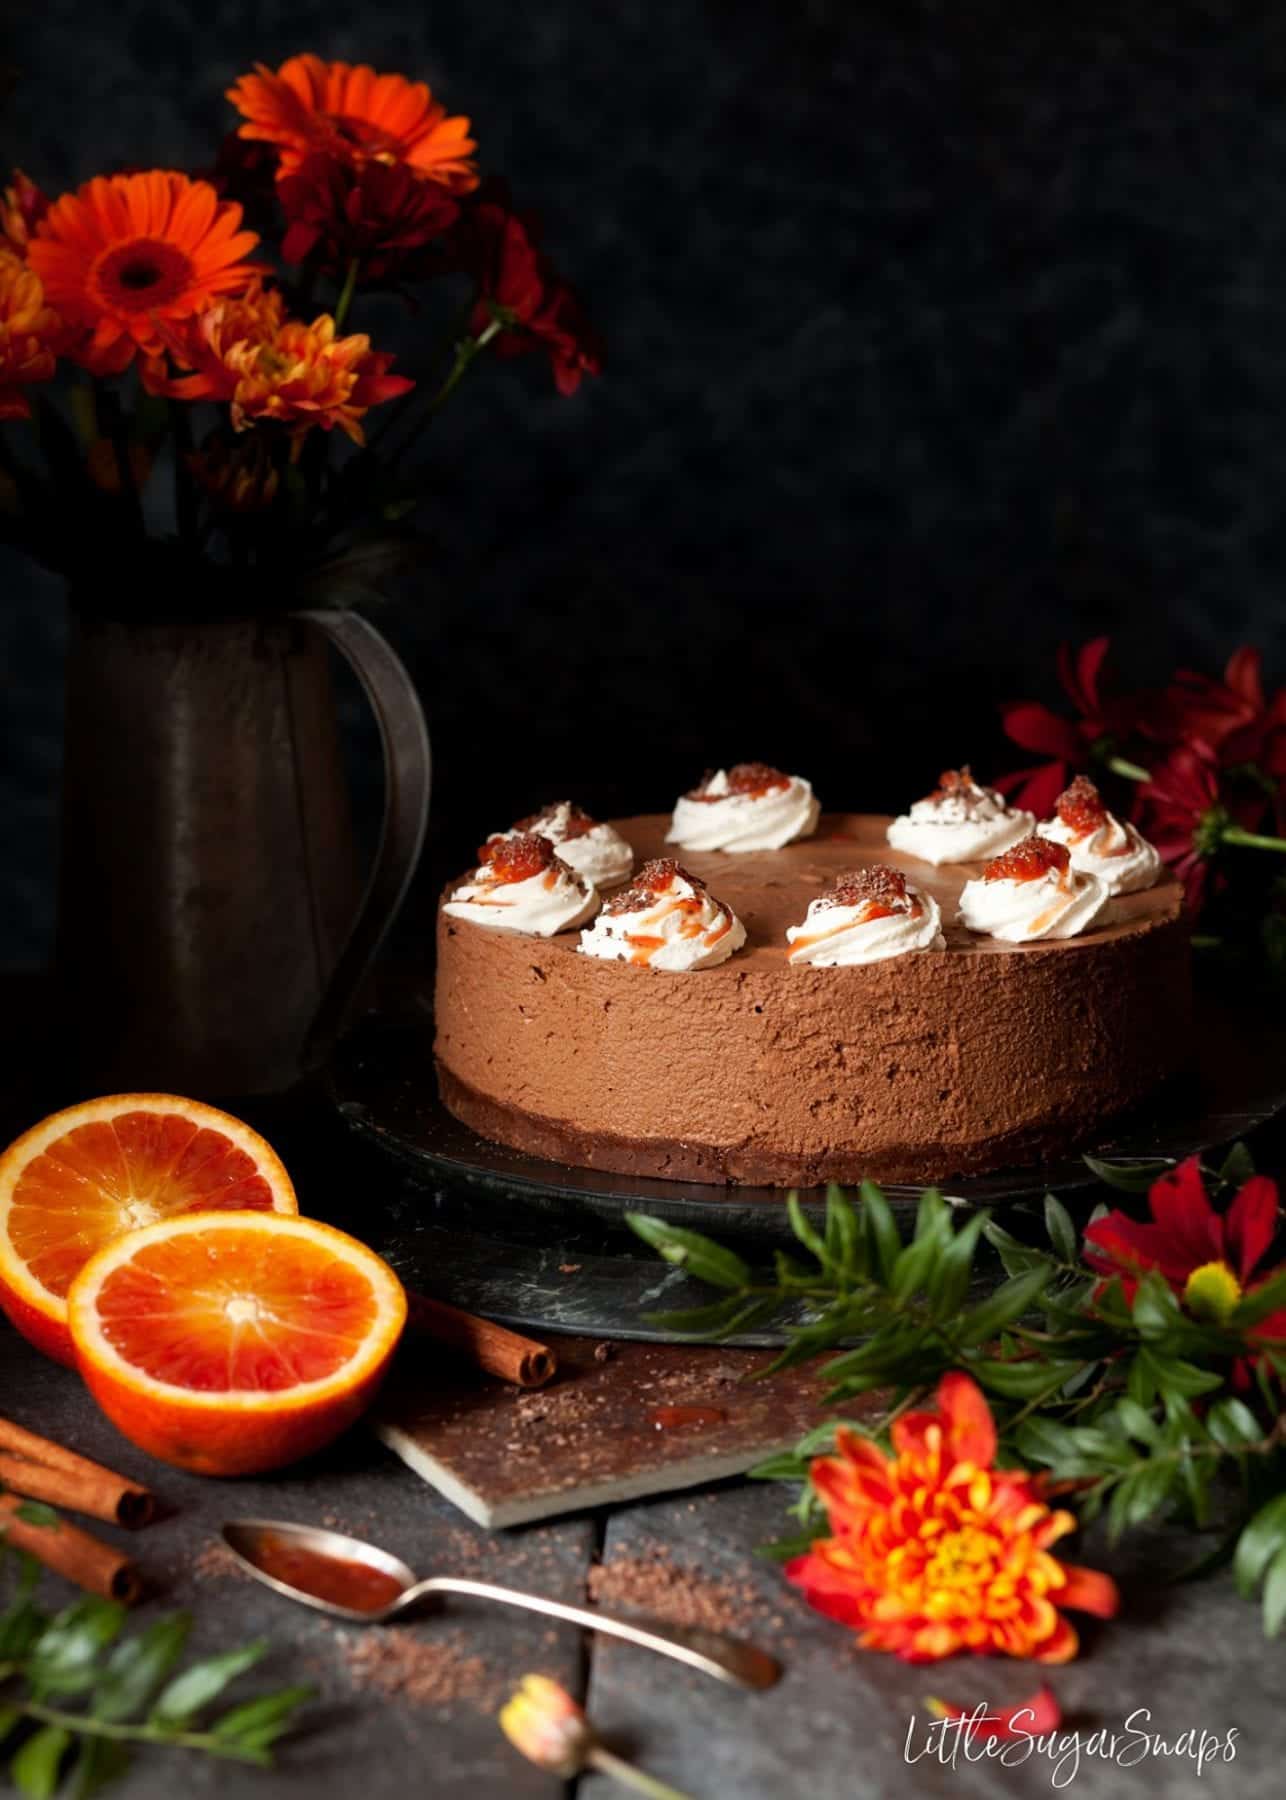 Cinnamon Chocolate Mousse Cake topped with cream and orange compote.